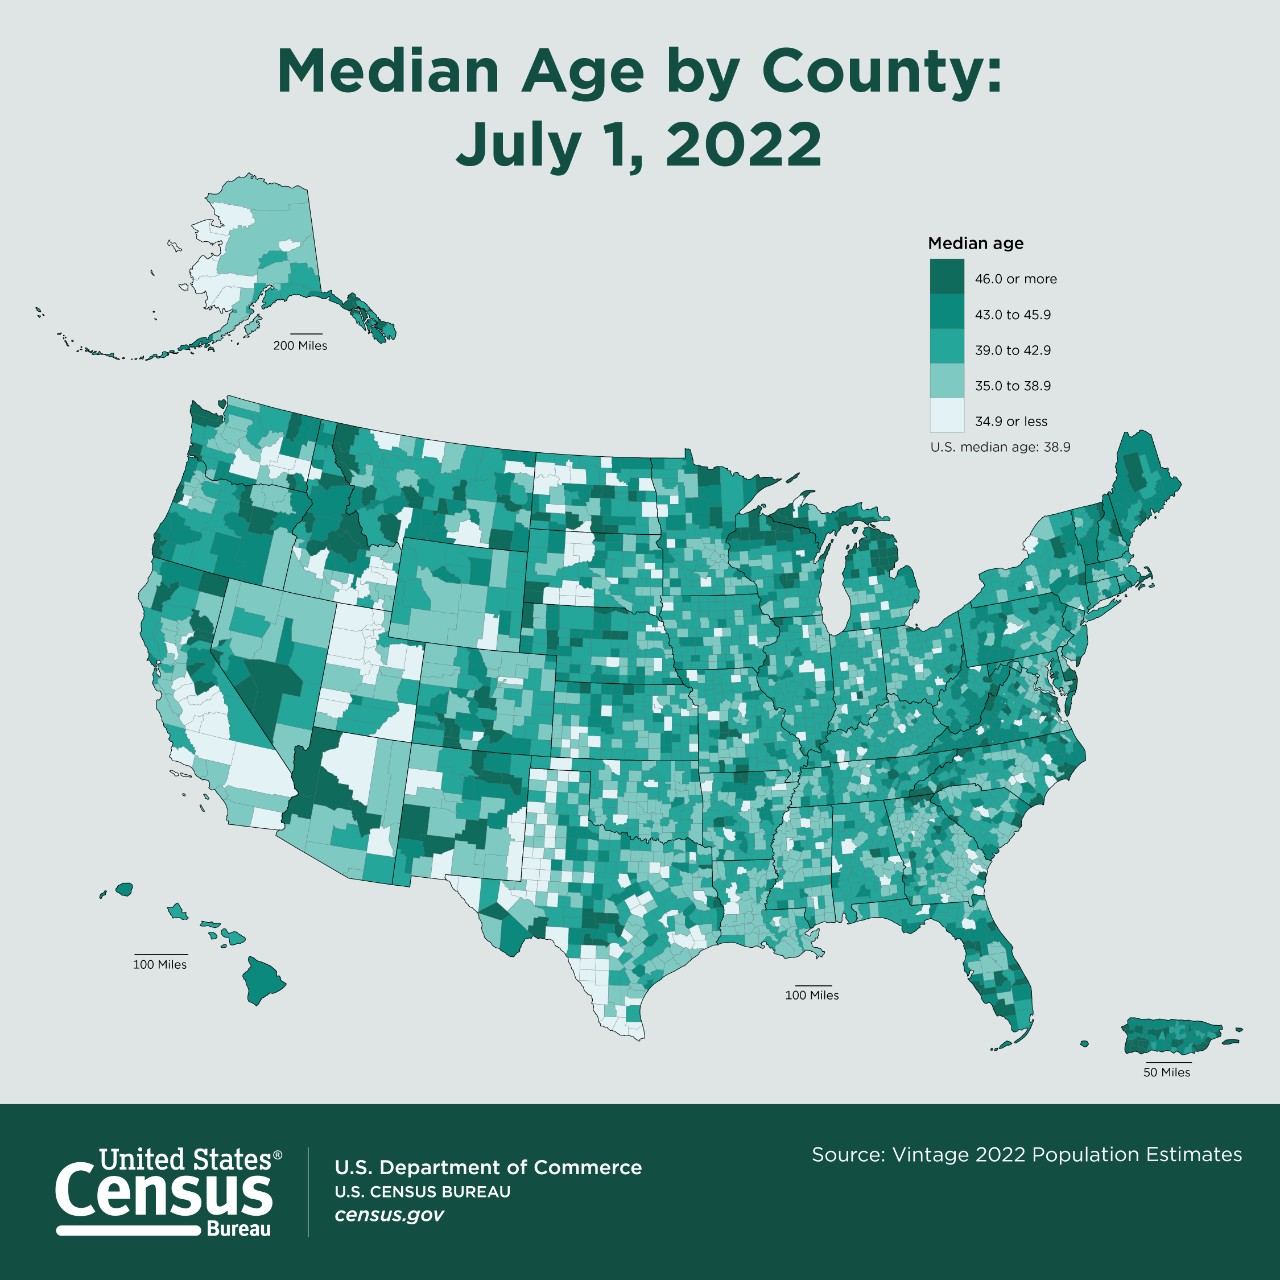 Median Age by County July 1, 2022